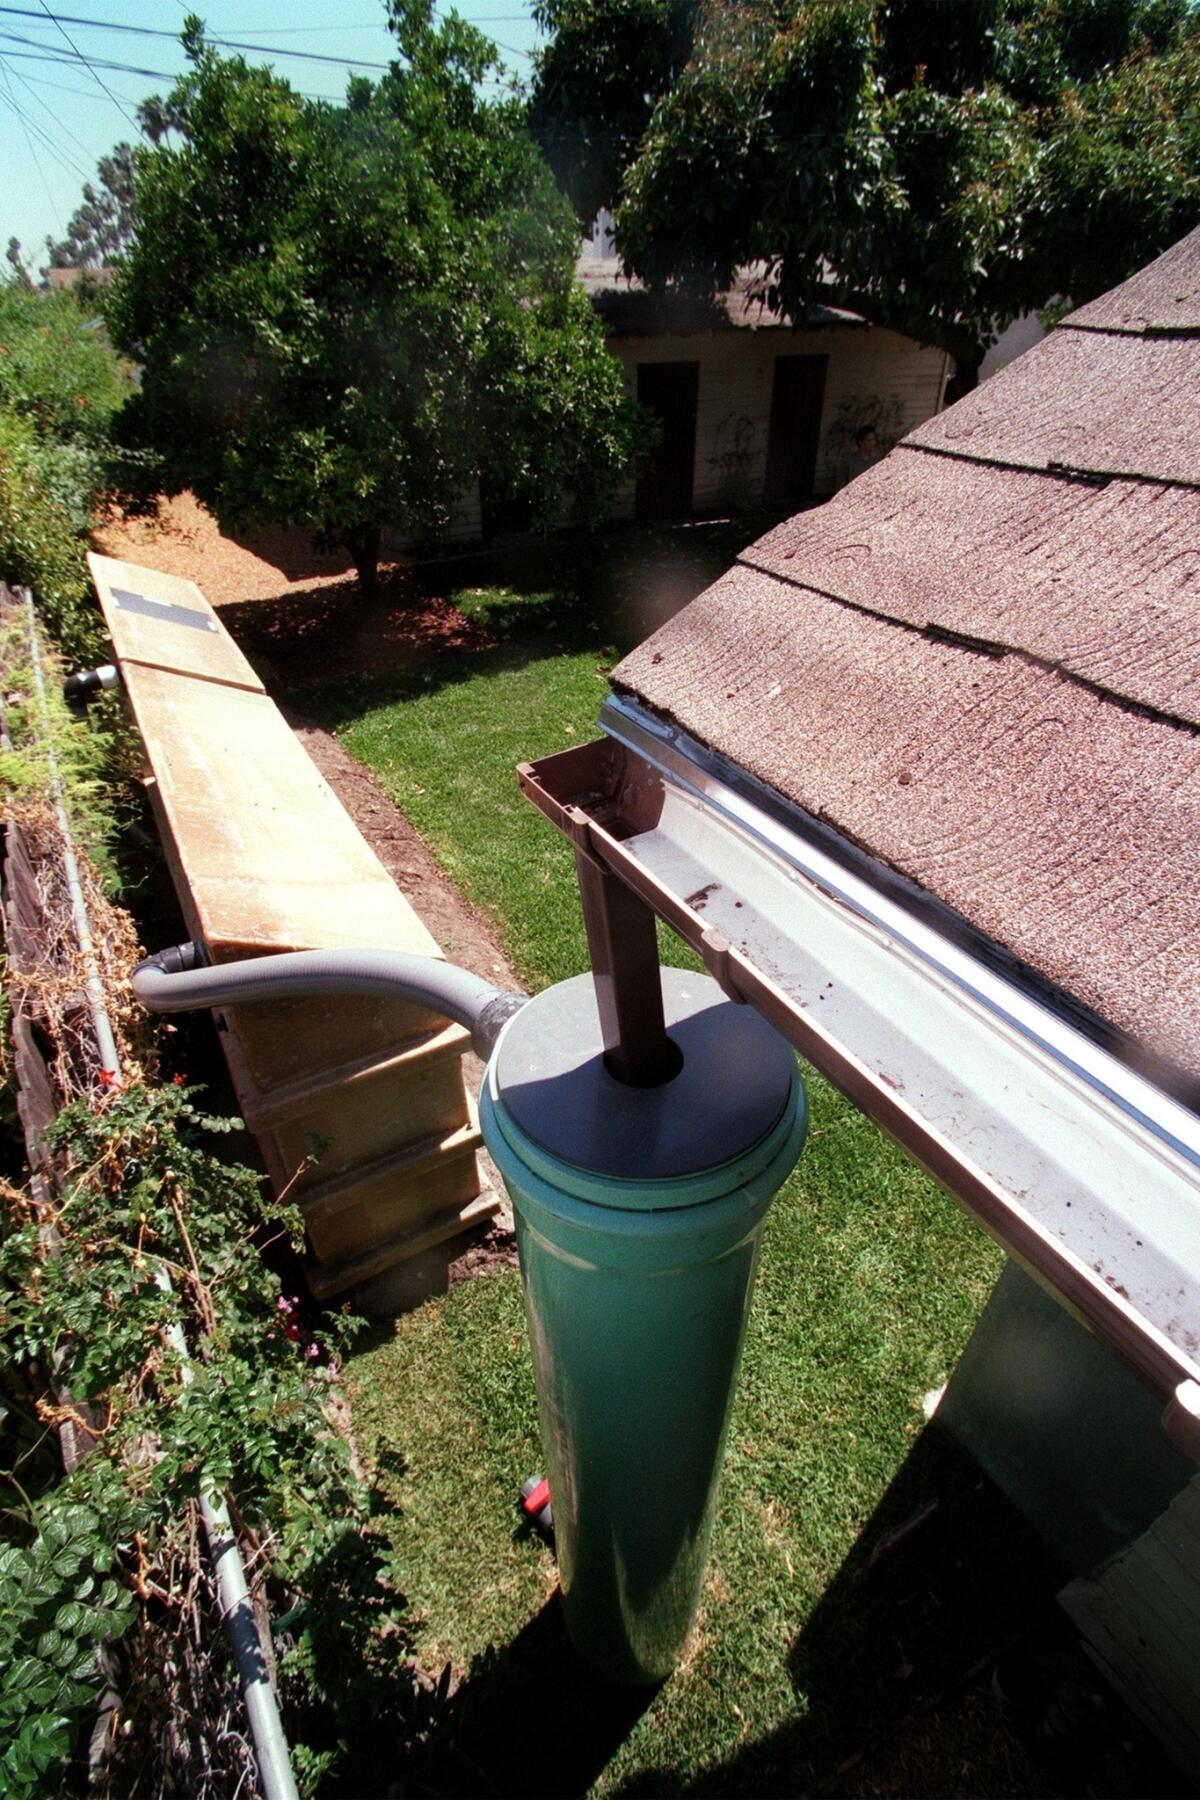 To protect against mold, be sure your gutters are clean and not leaking.